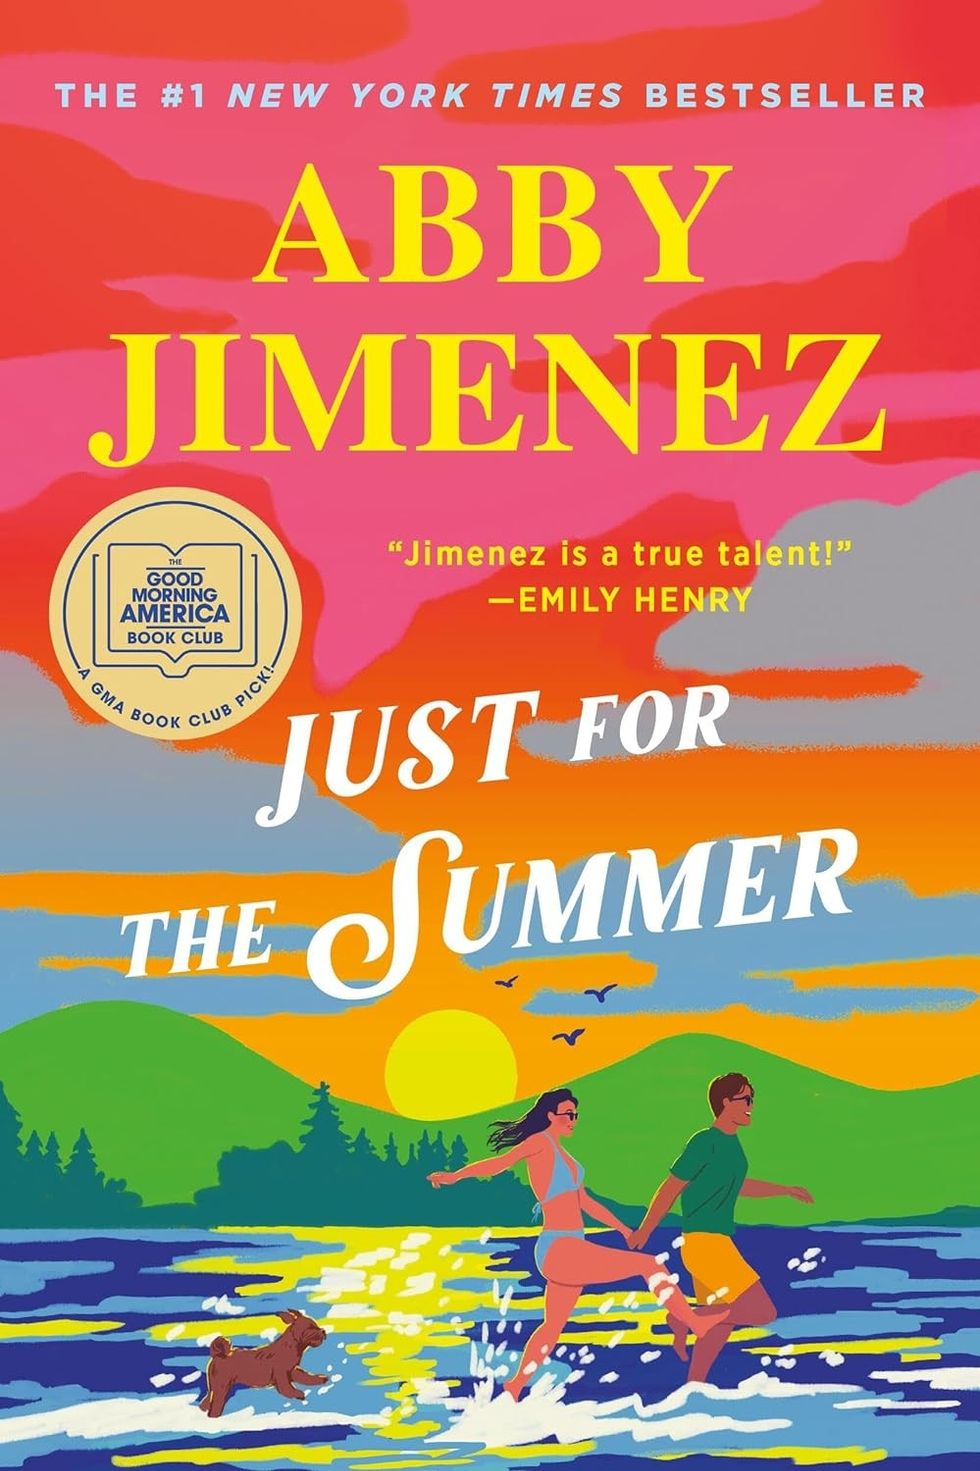 Just for the Summer by Abby Jimenez